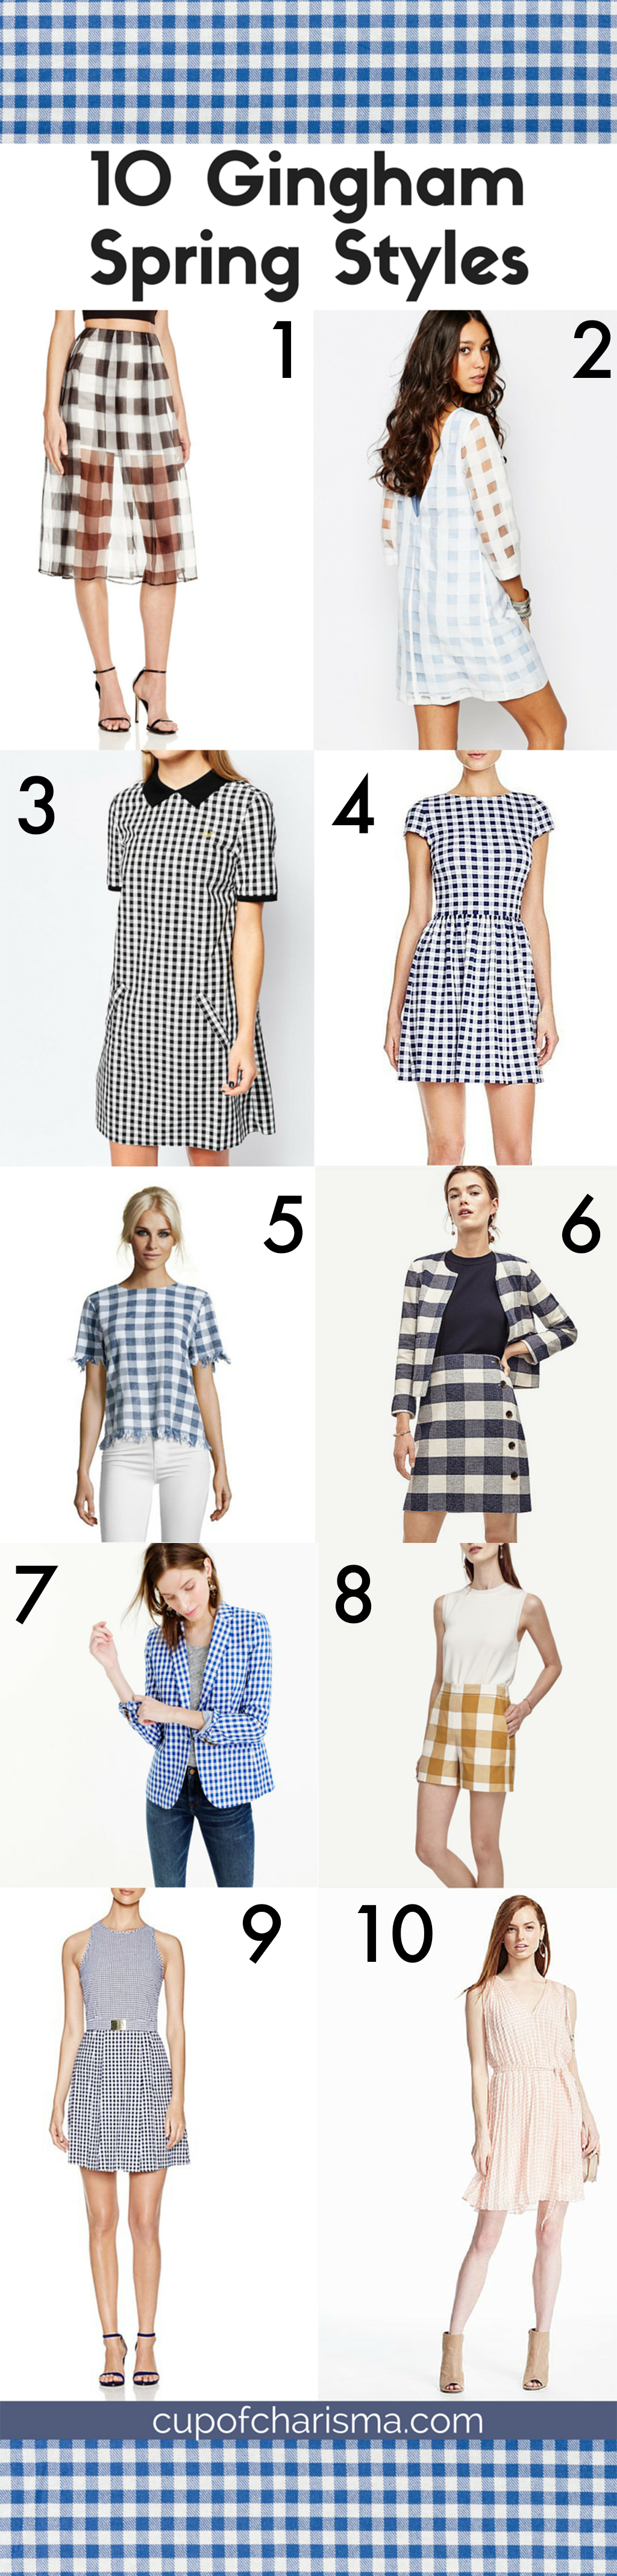 Gingham is one of the top spring trends, so here's a definitive list of the top 10 gingham pieces to add to your closet. 